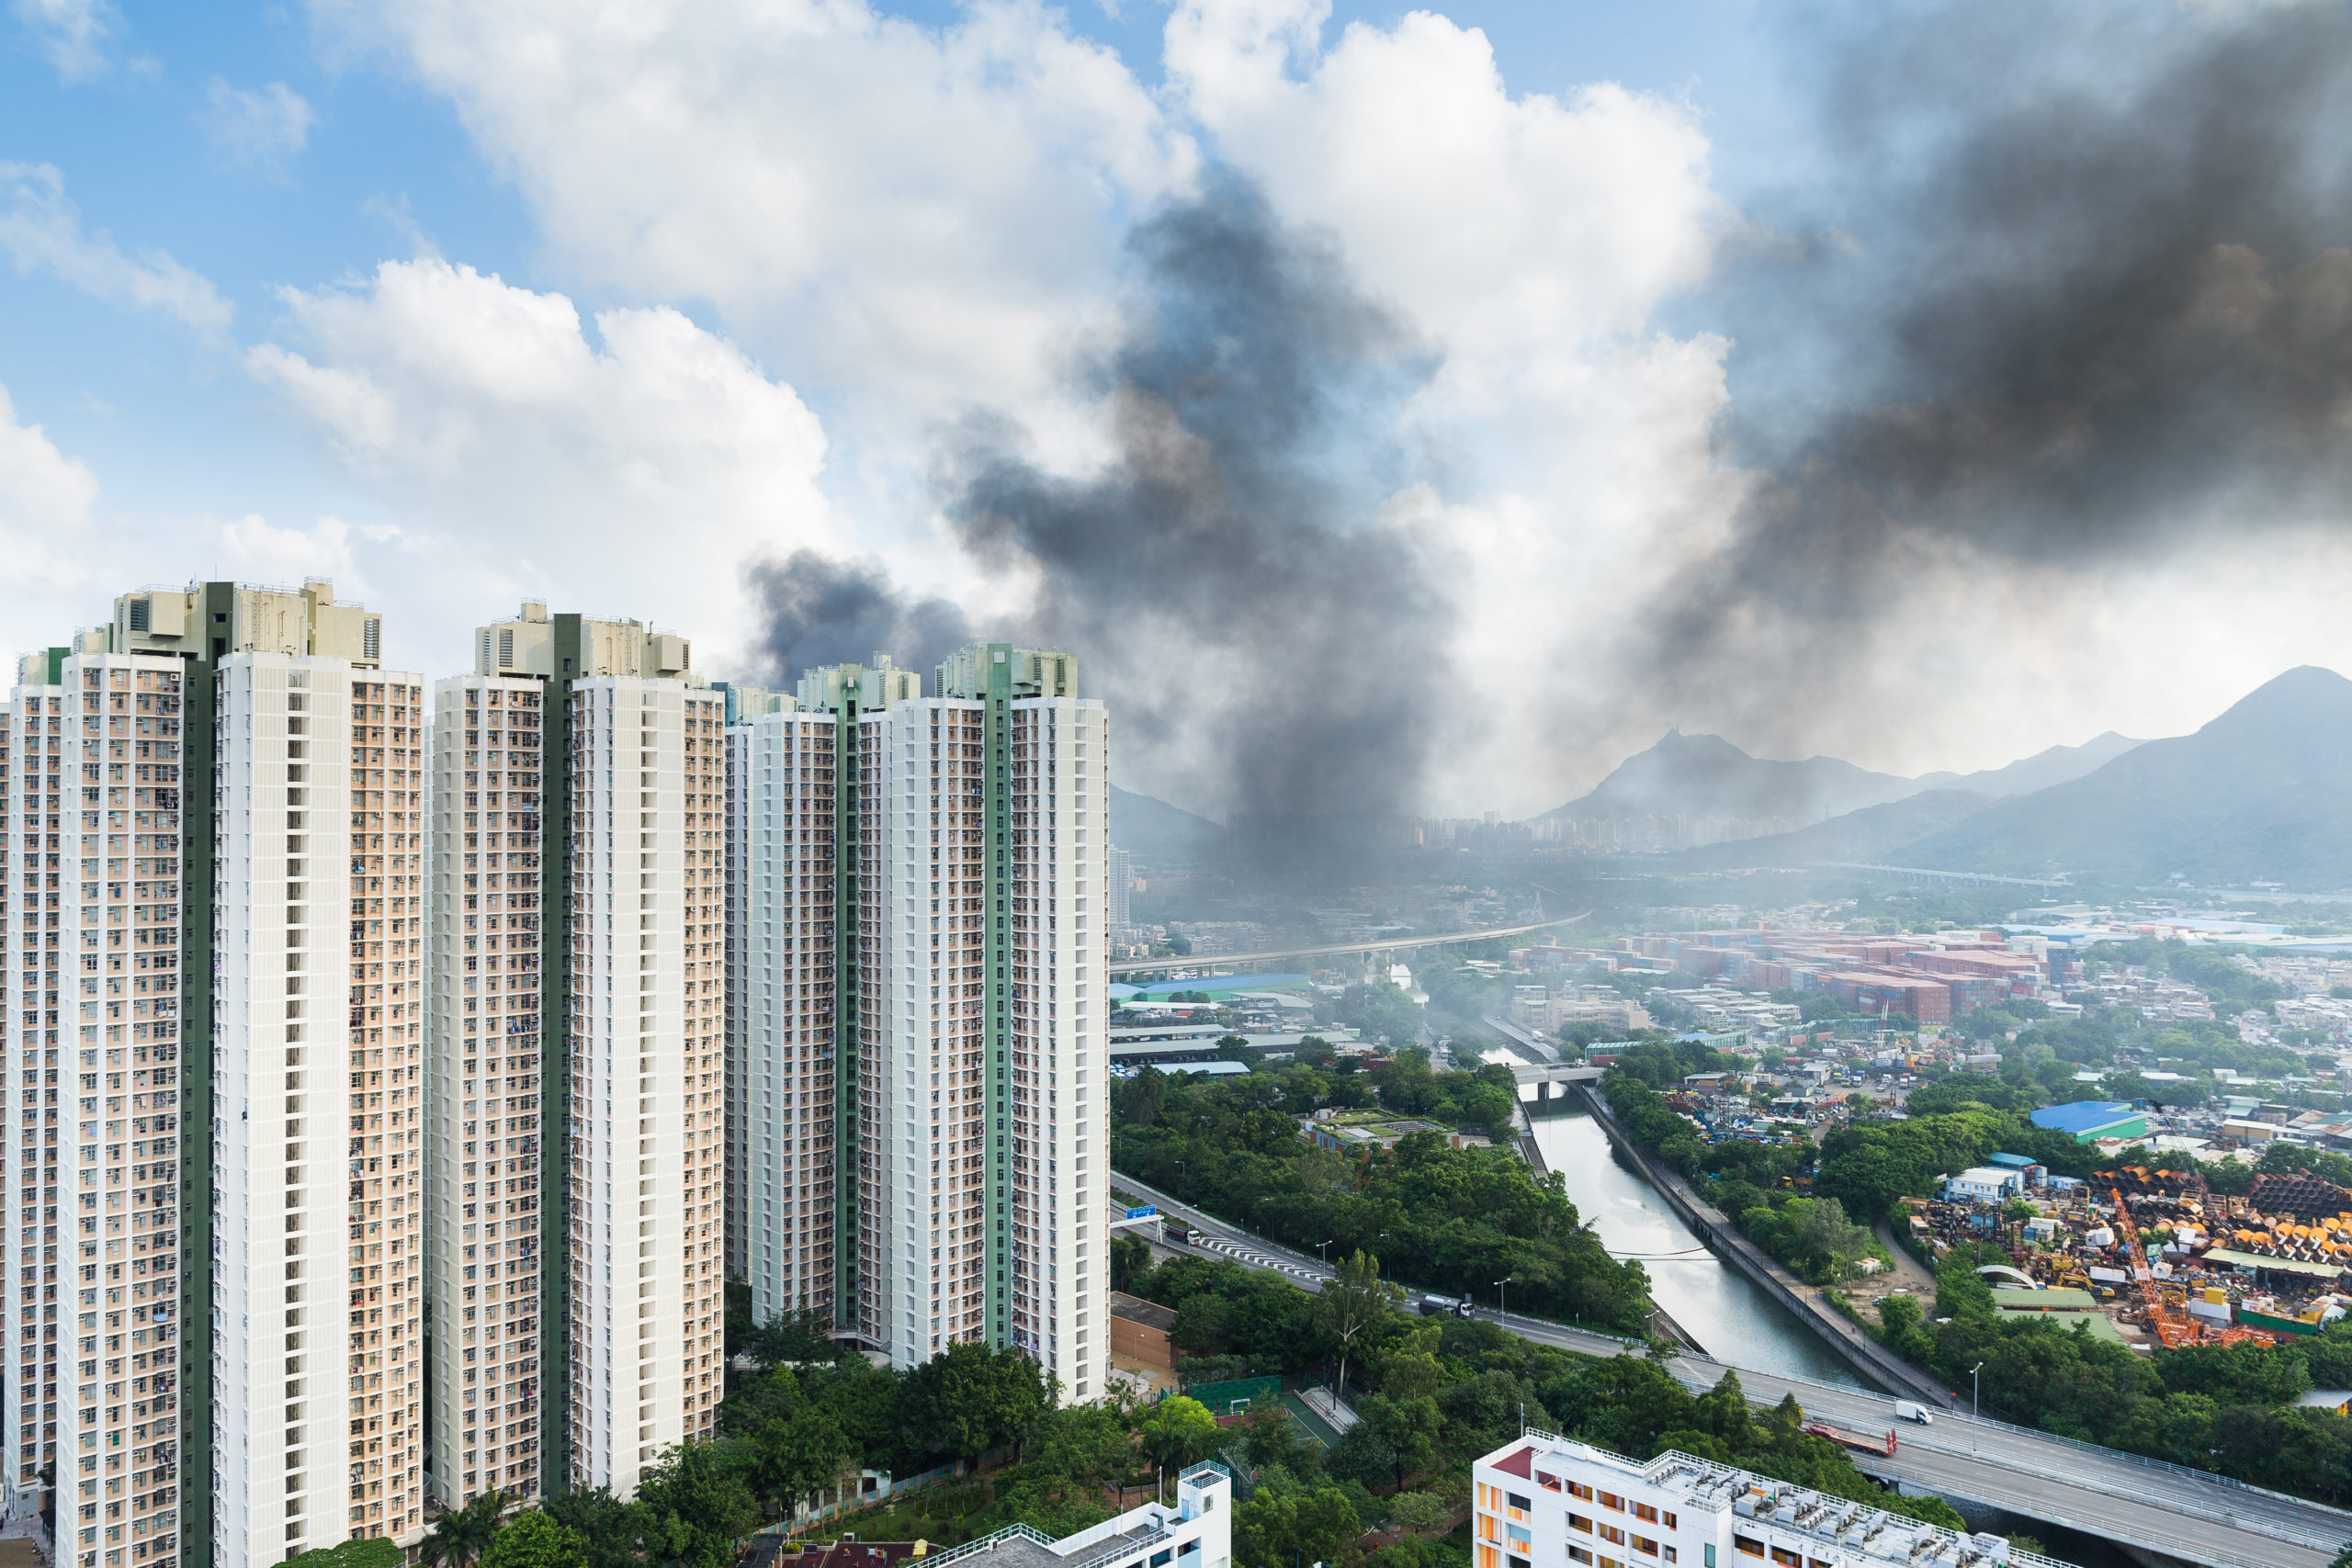 image of a high rise building and/or or condominium on fire and resulting smoke